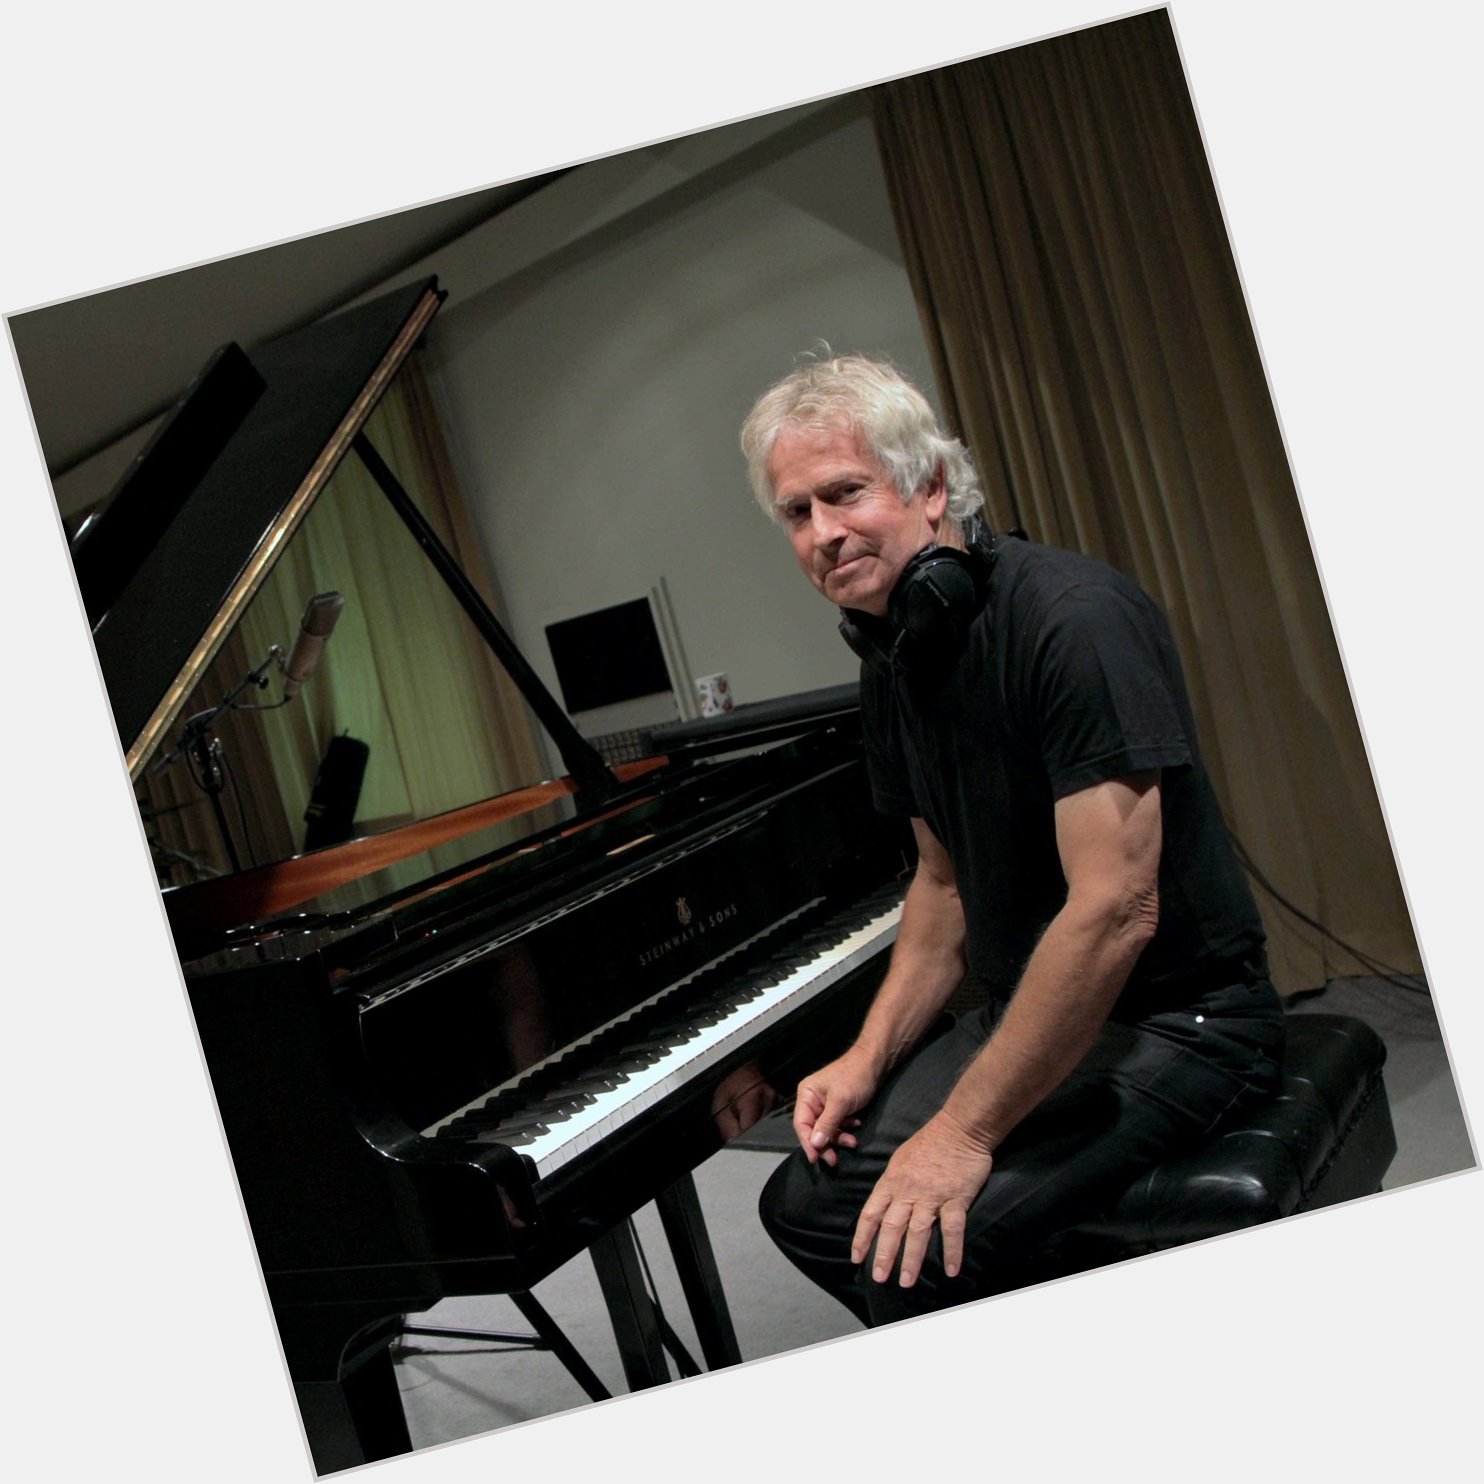 Happy Birthday to Tony Banks, born on this day in 1950. 